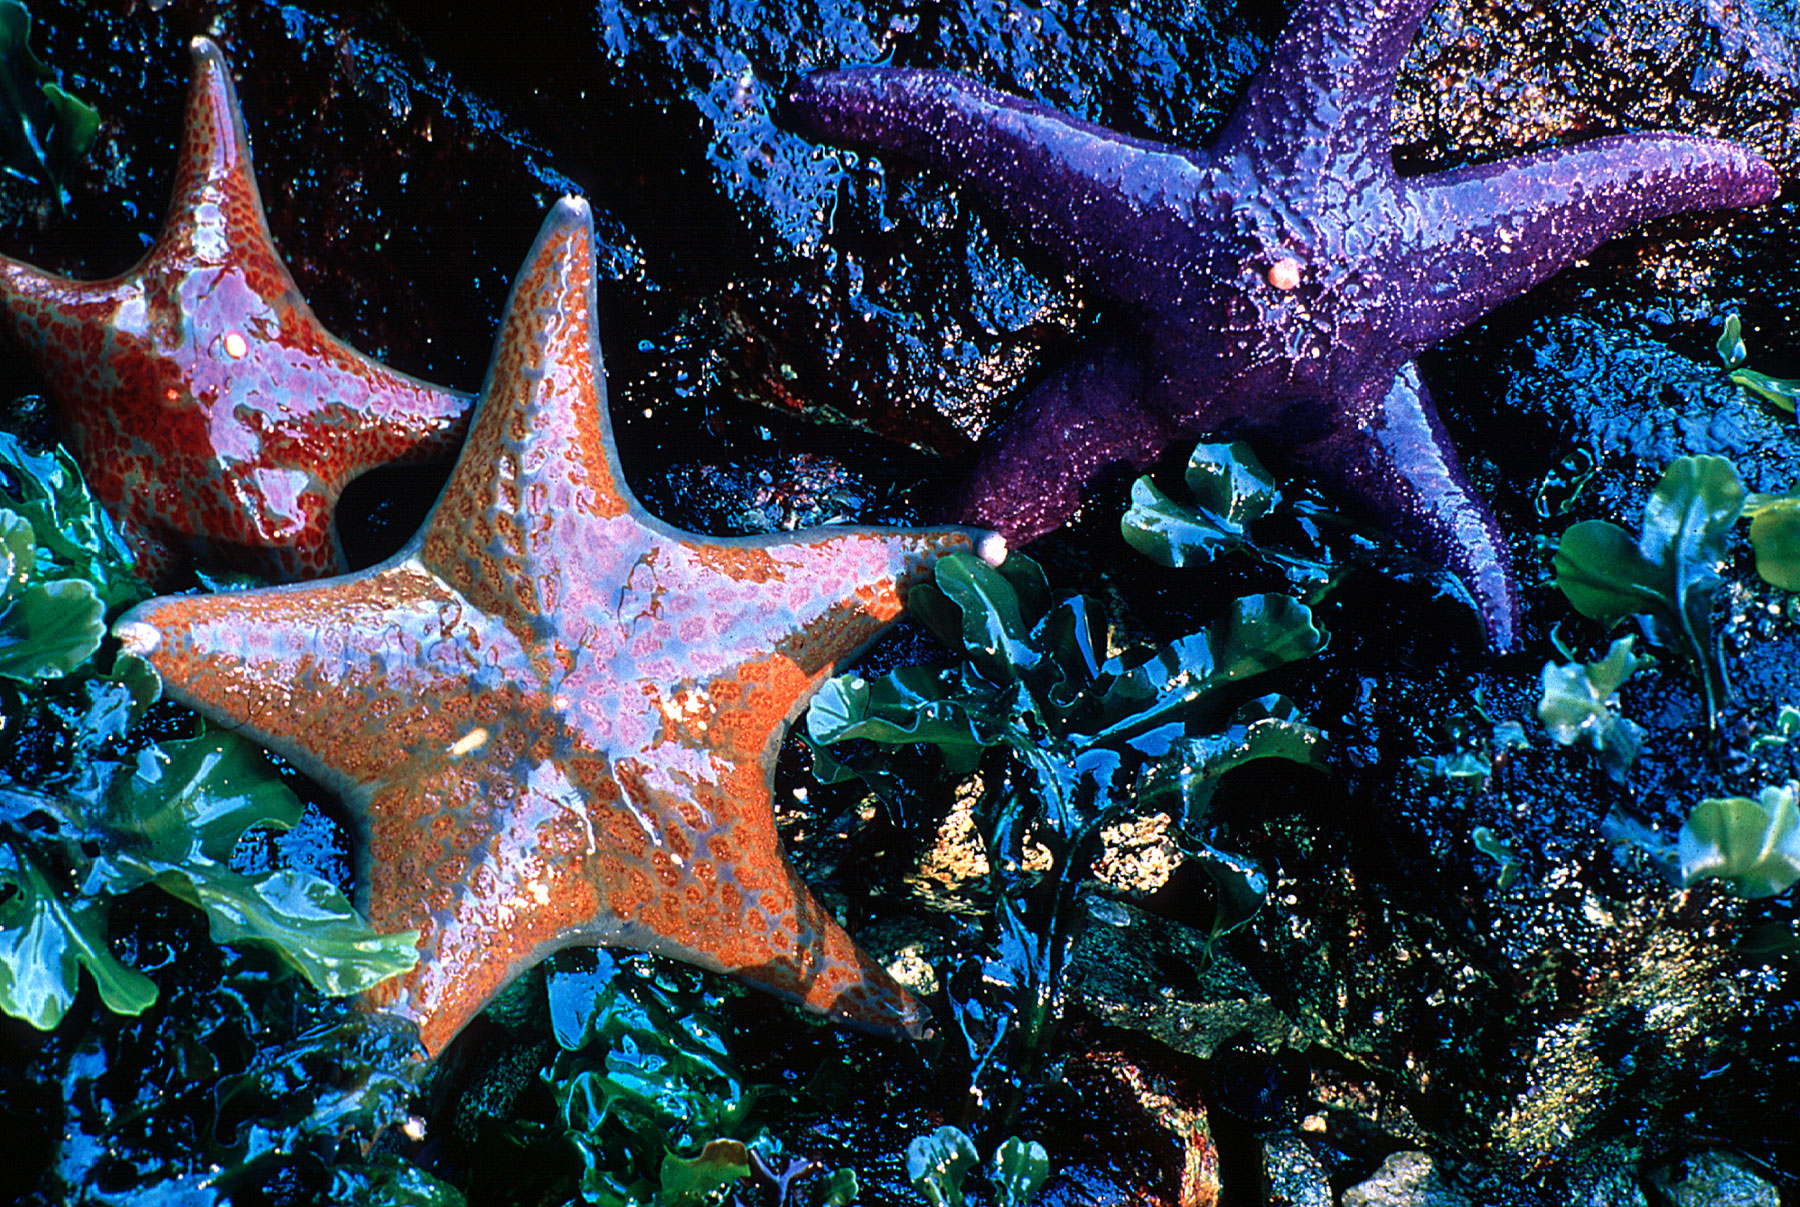 When the tide is out, the rocky shores of Gulf of the Farallones National Marine Sanctuary reveal hundreds of invertebrates, like these sea stars. (Courtesy of Joe Heath)